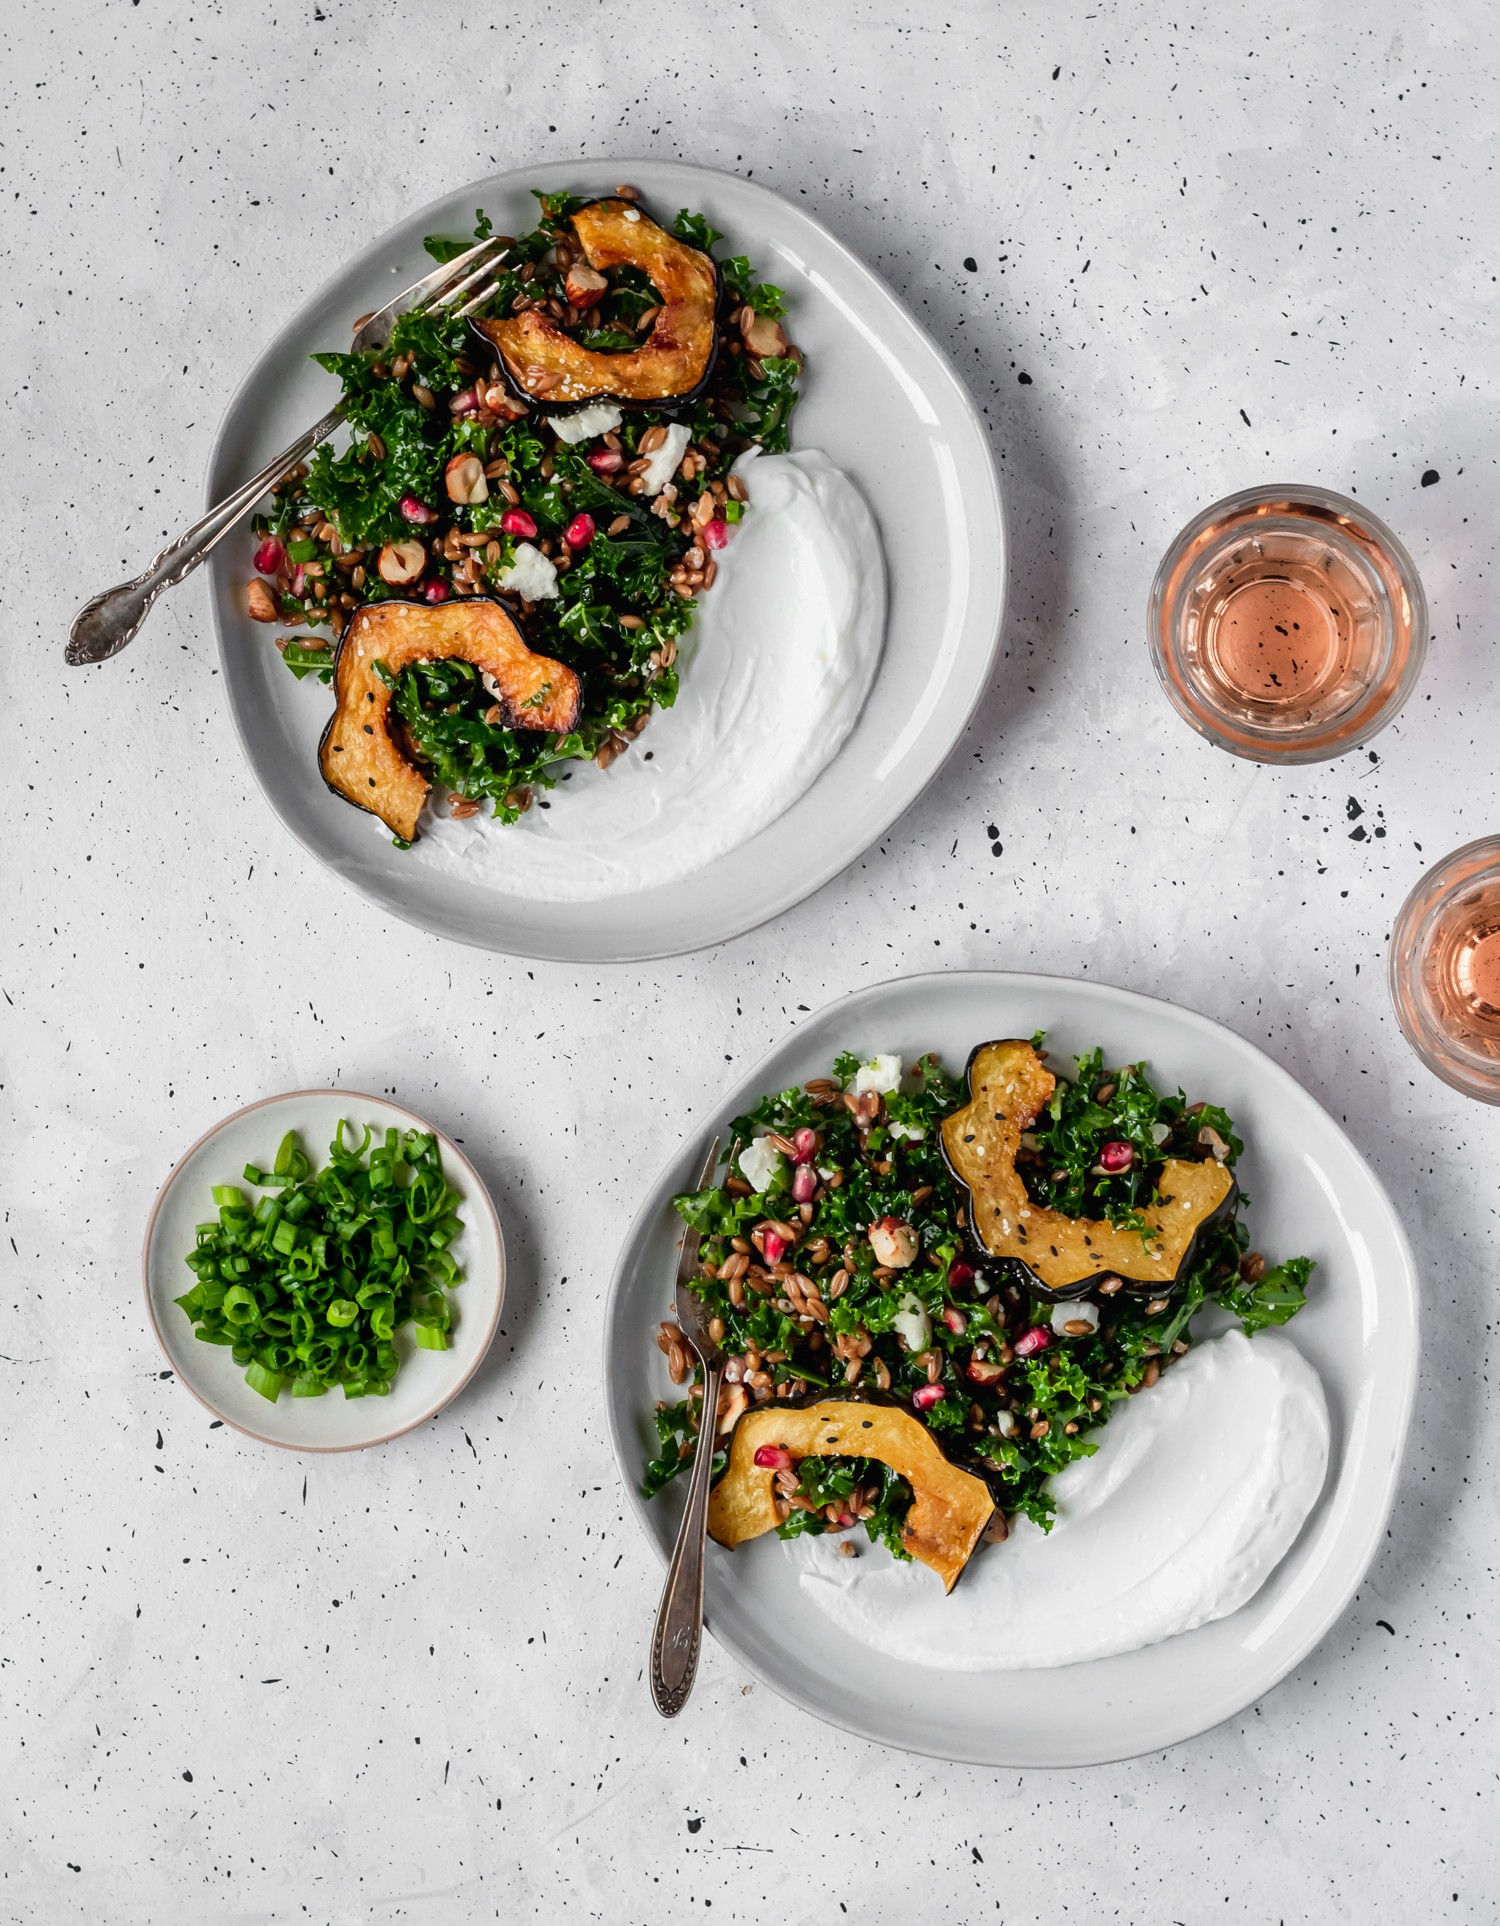 Two white plates of farro salad on a white counter next to a bowl of scallions and two glasses of pink wine.